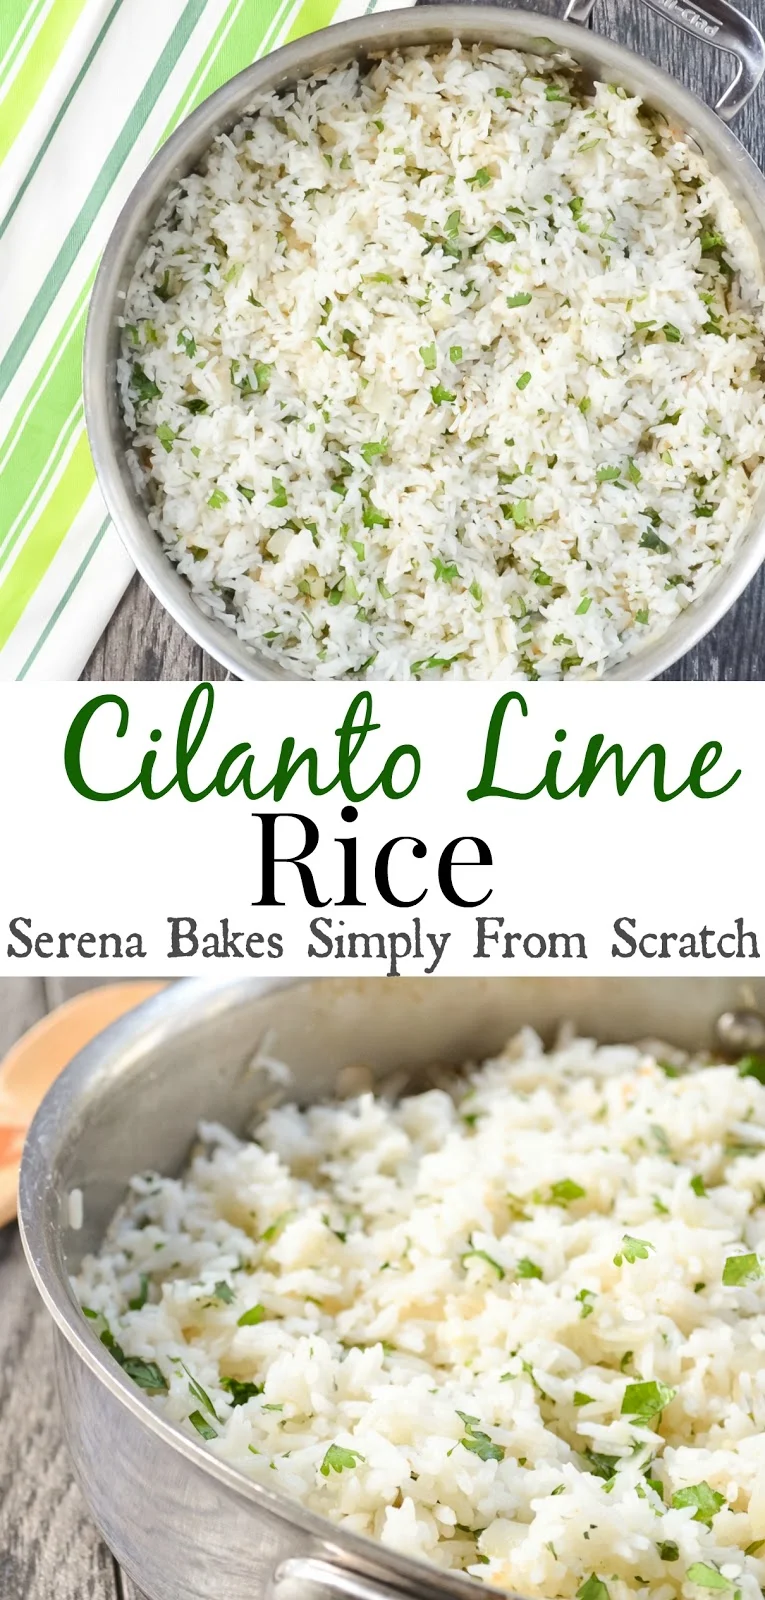 Easy to make Cilantro Lime Rice. serenabakessimplyfromscratch.com